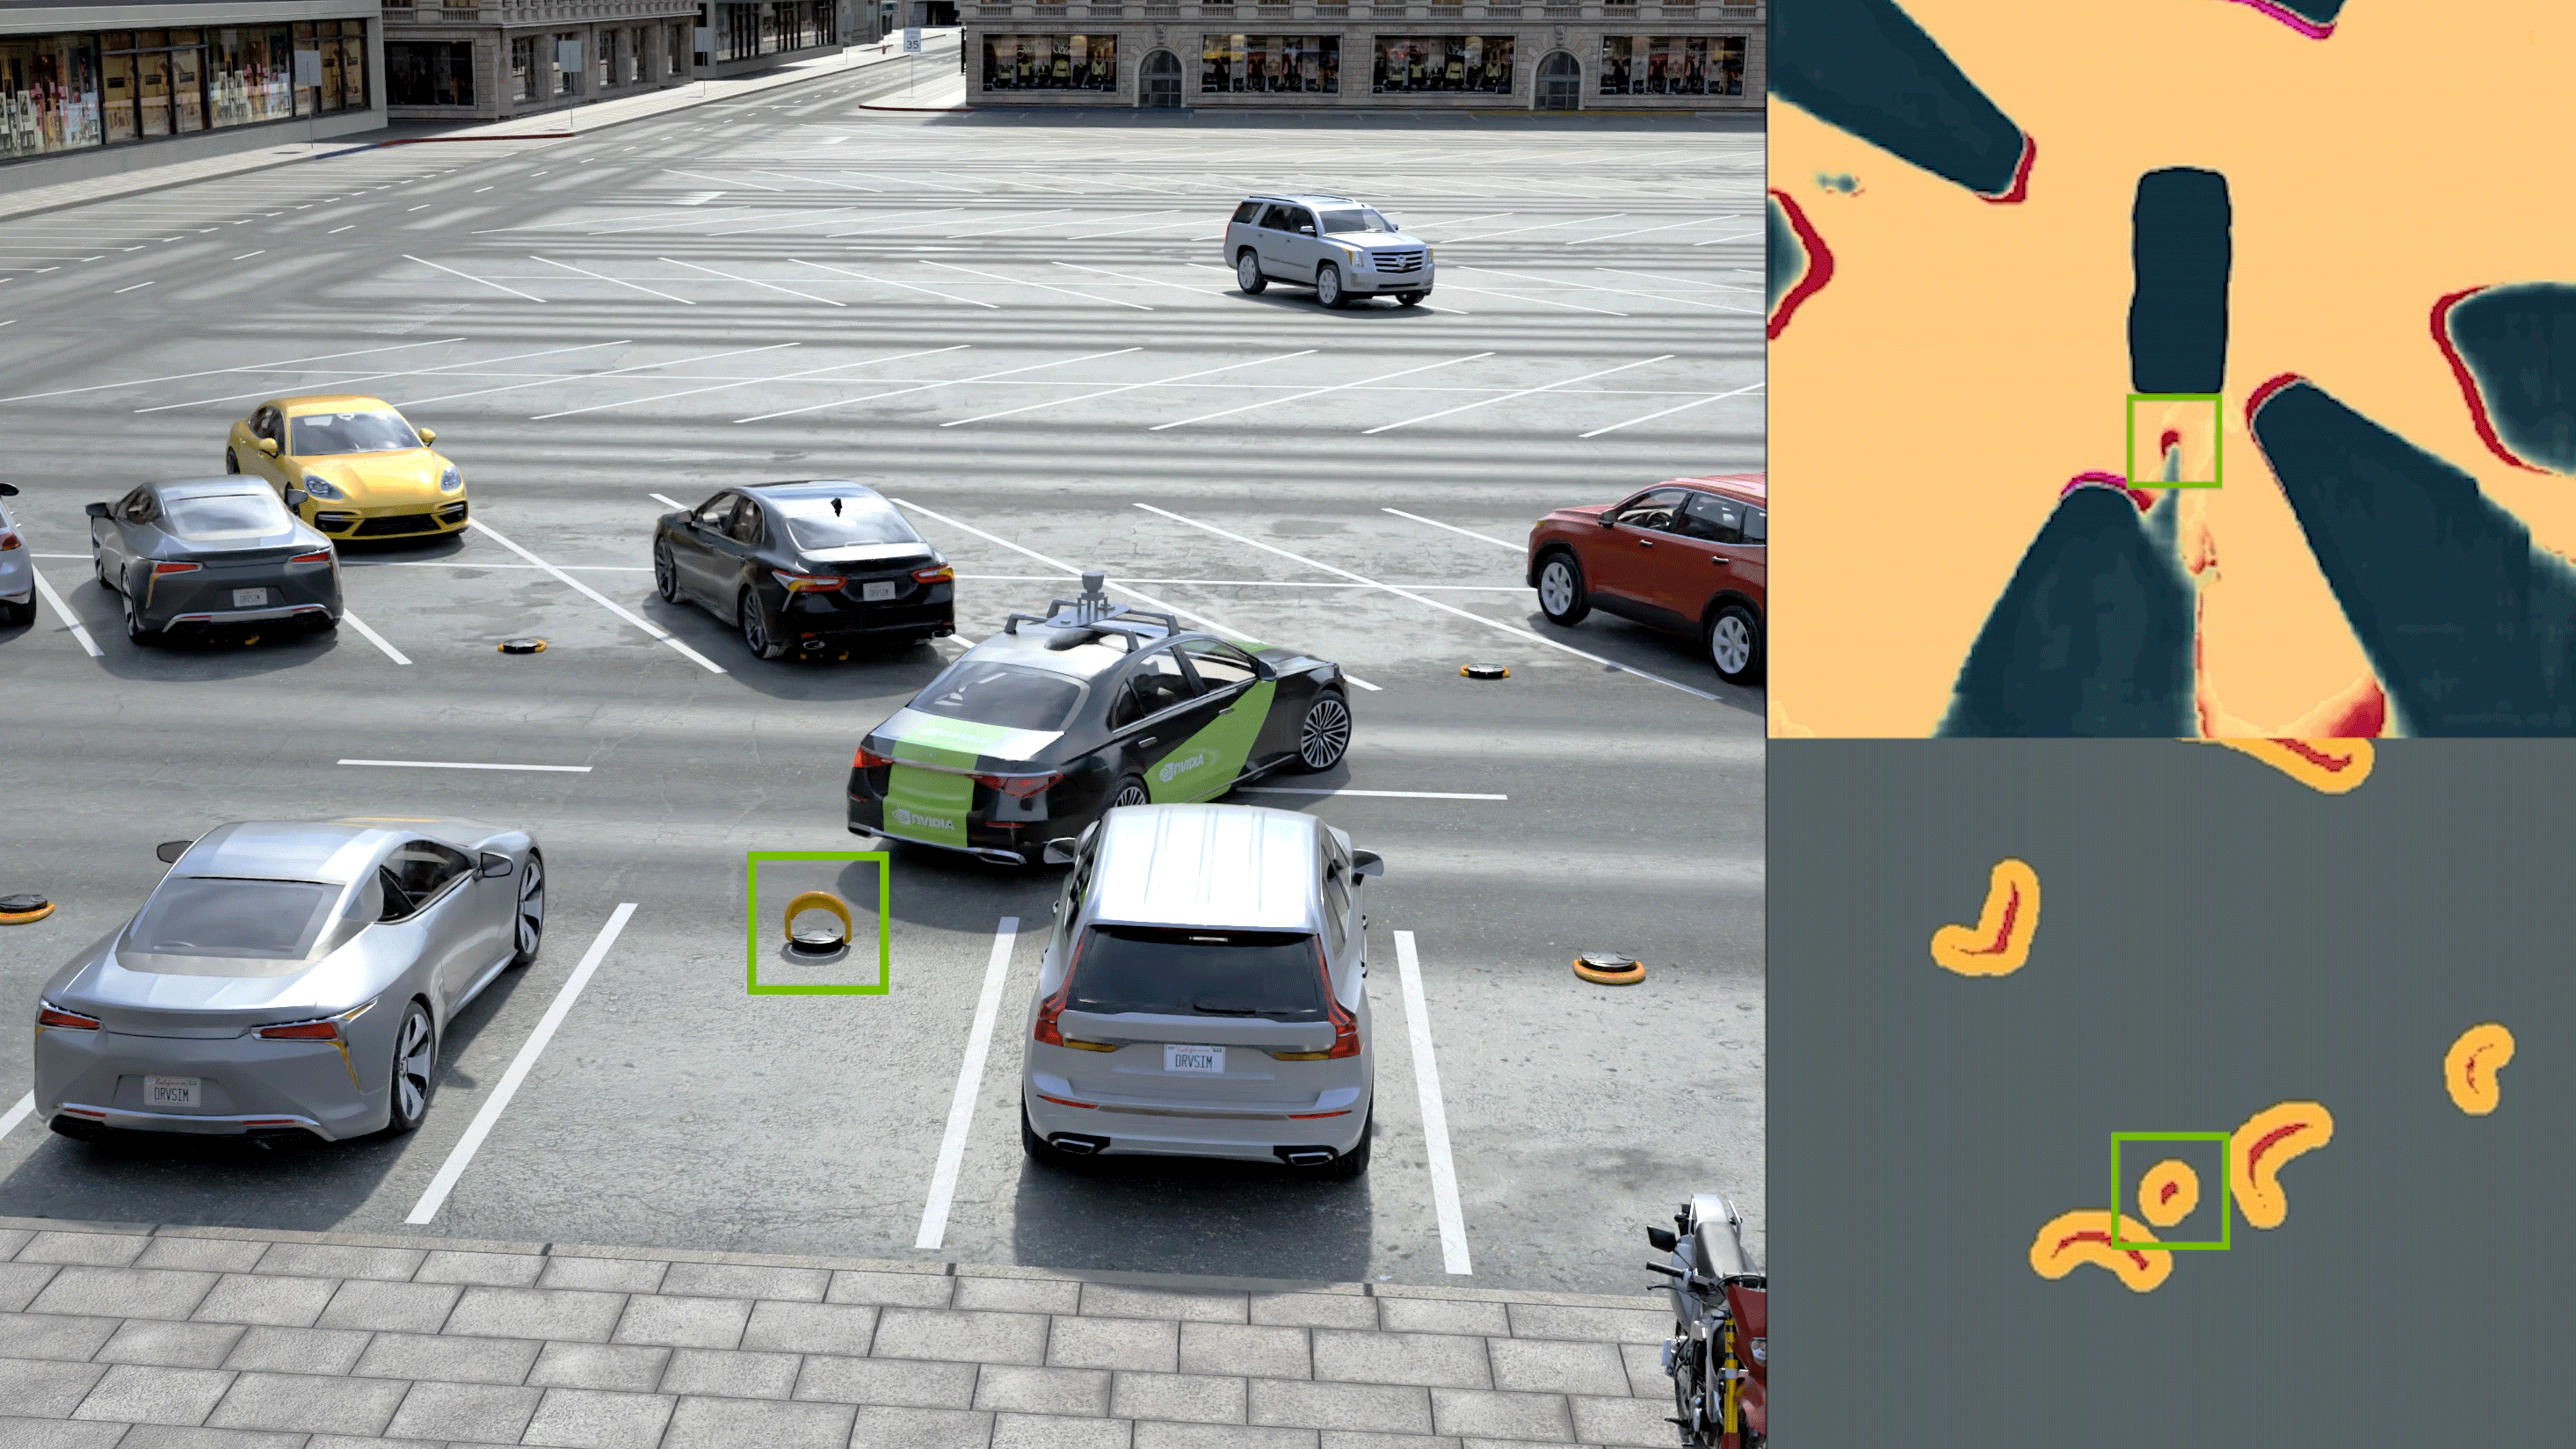 Image of a car backing into a parking spot using object perception.